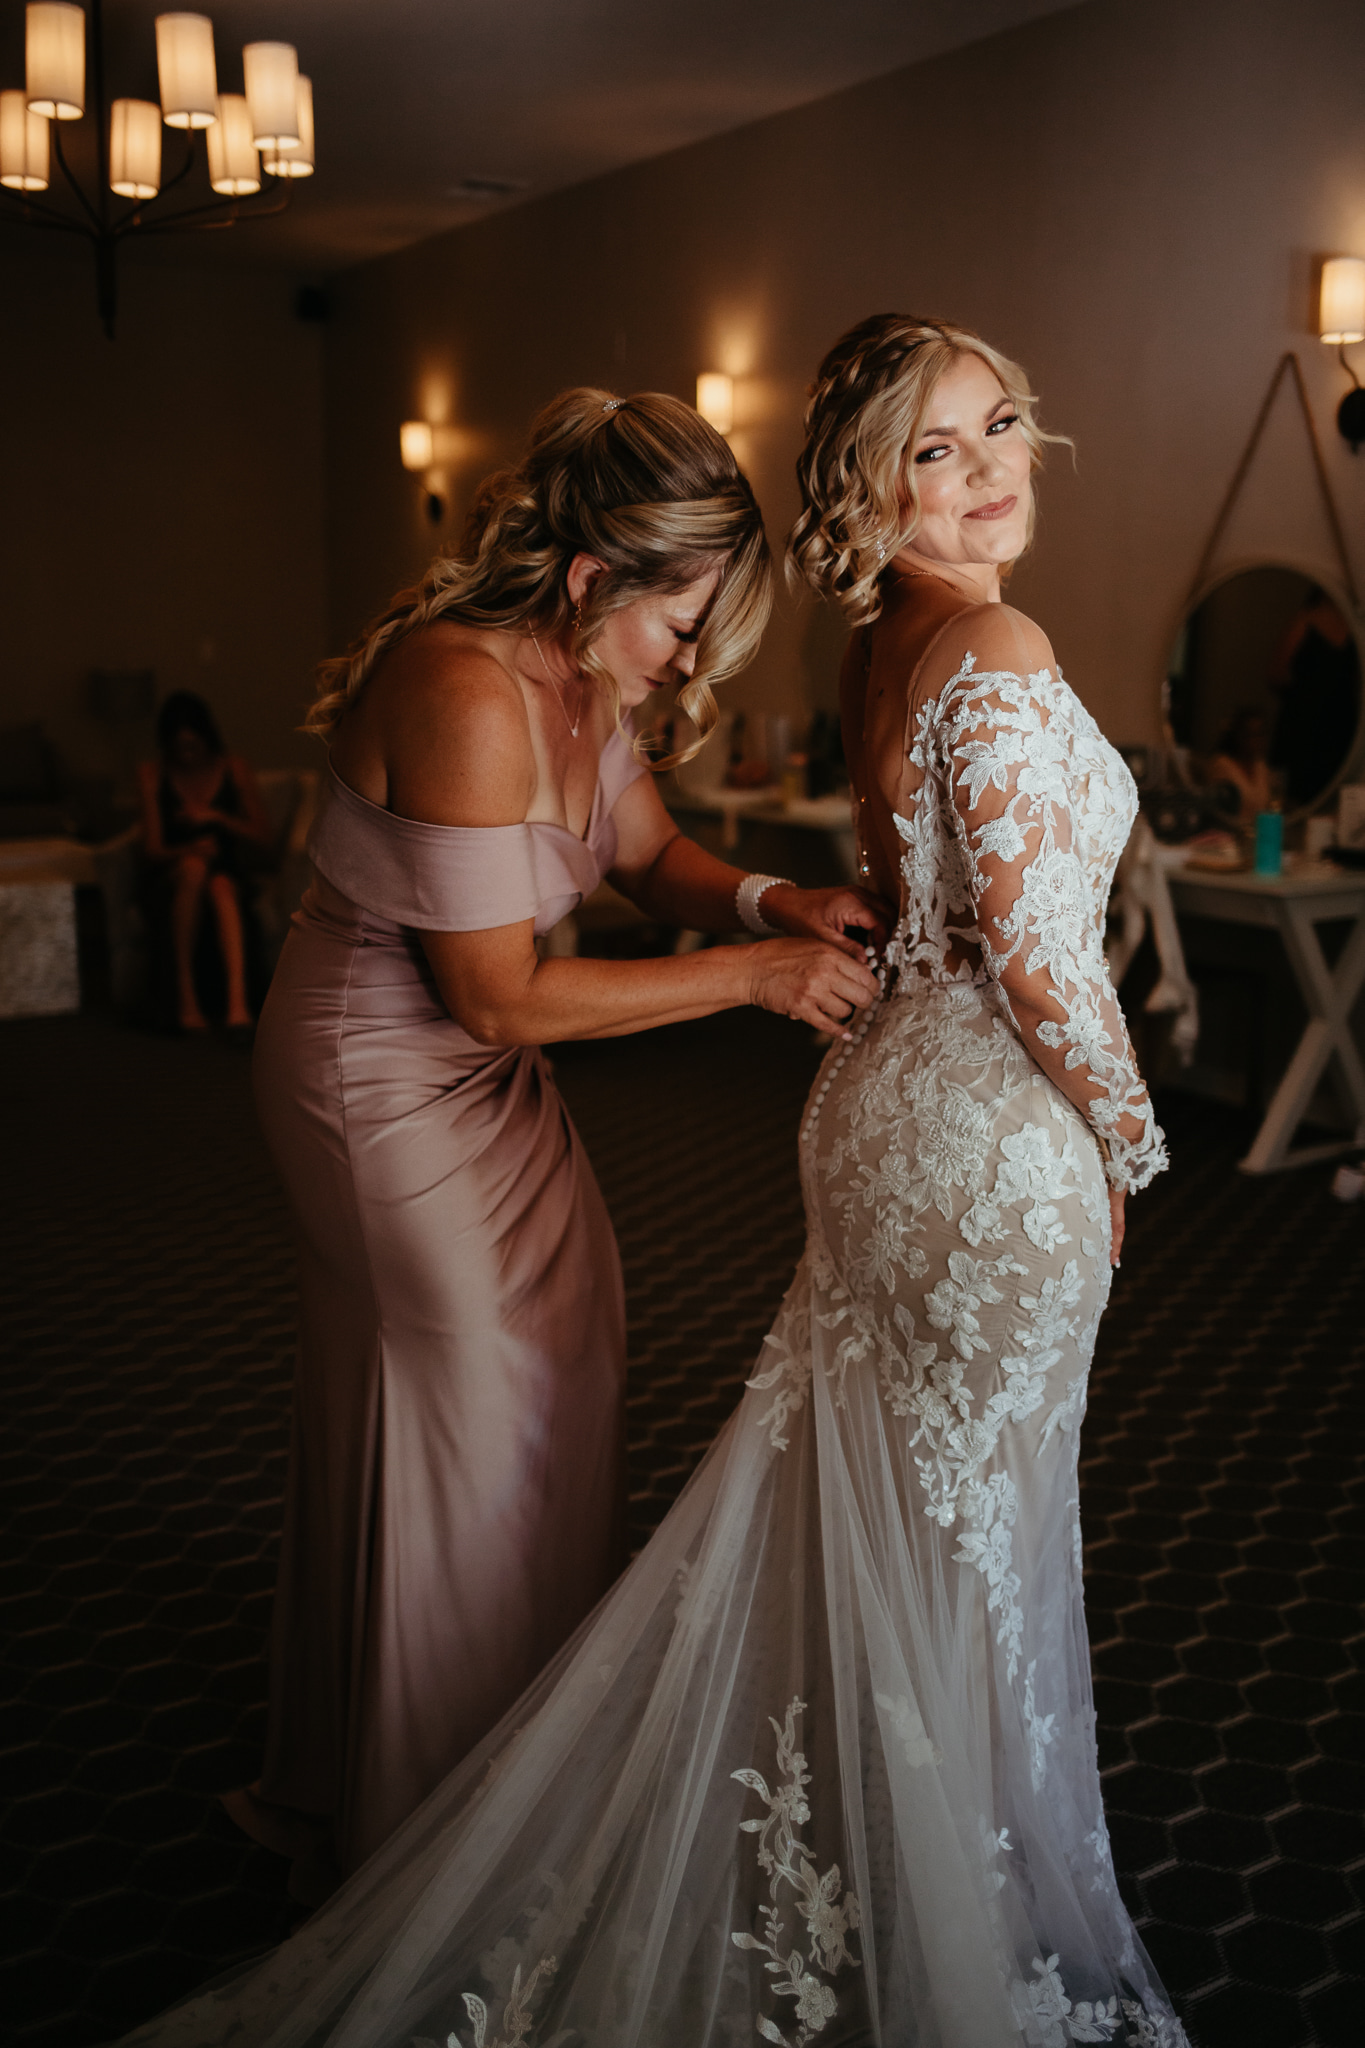 Beautiful Bride and Mom Getting Ready with gorgeous lighting from window